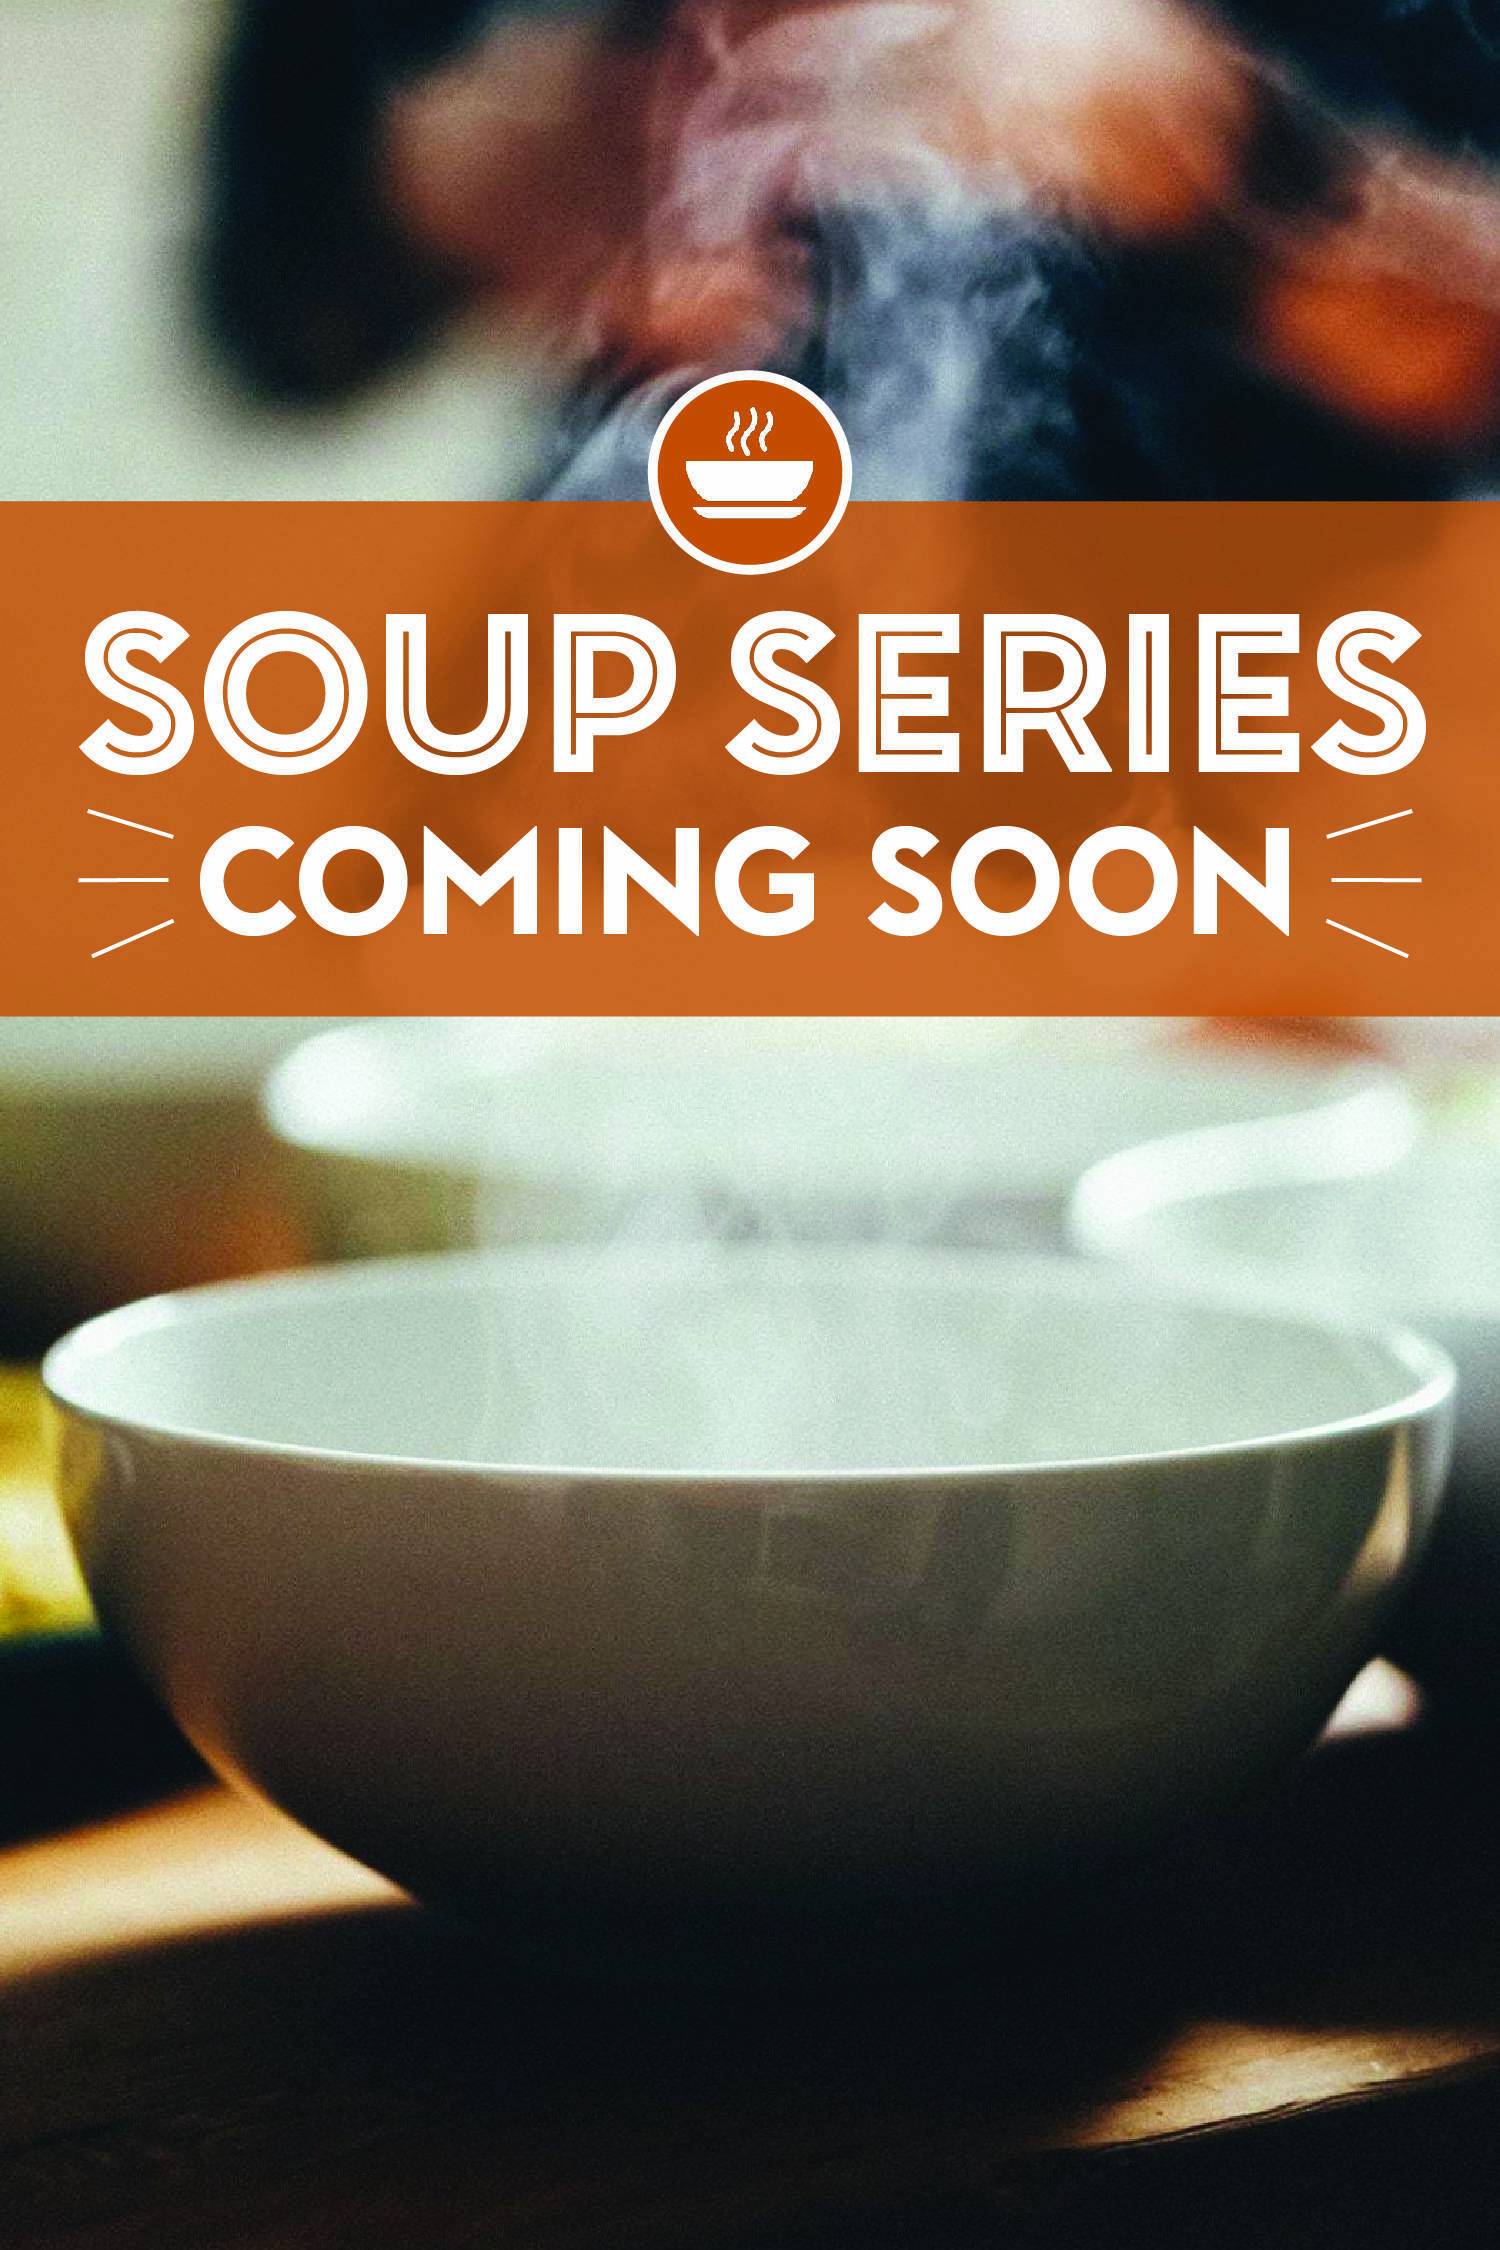 Teaser photo of a steaming bowl of soup to kick off the soup series!